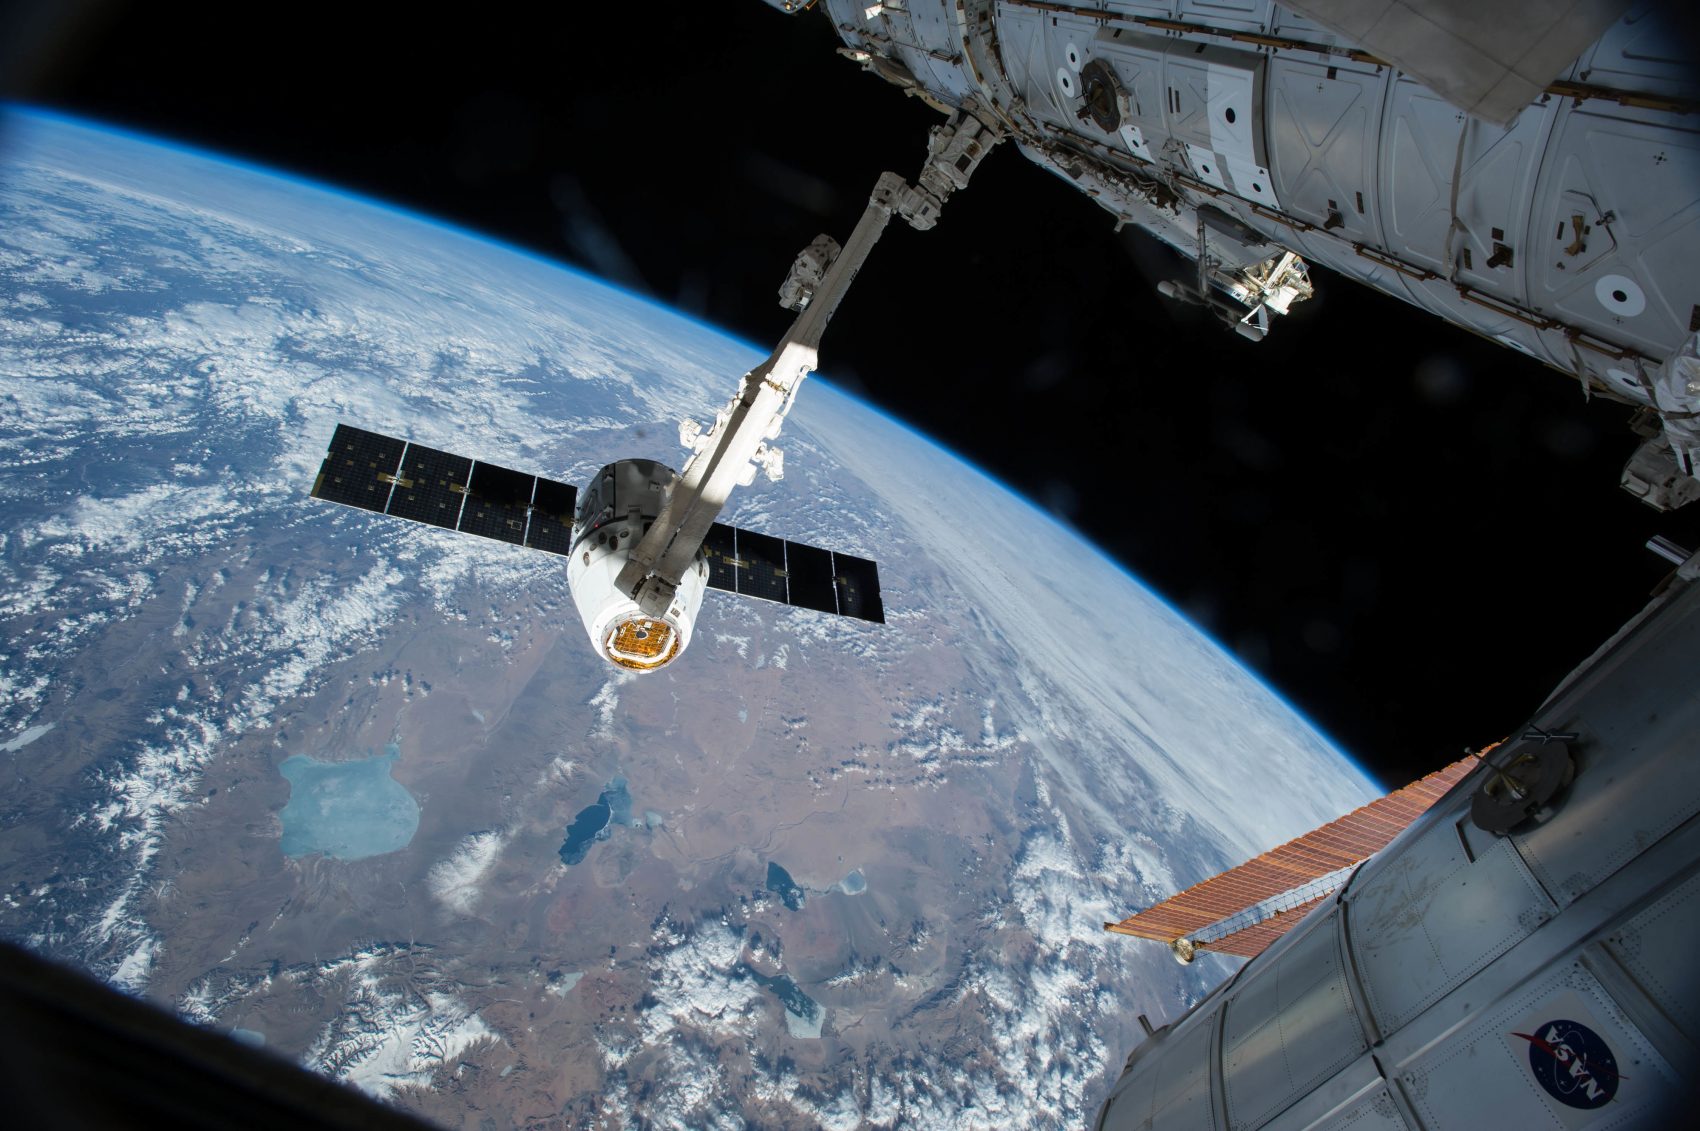 In this April 17, 2015 photo, the Canadarm 2 reaches out to capture the SpaceX Dragon cargo spacecraft for docking to the International Space Station. (NASA/AP)